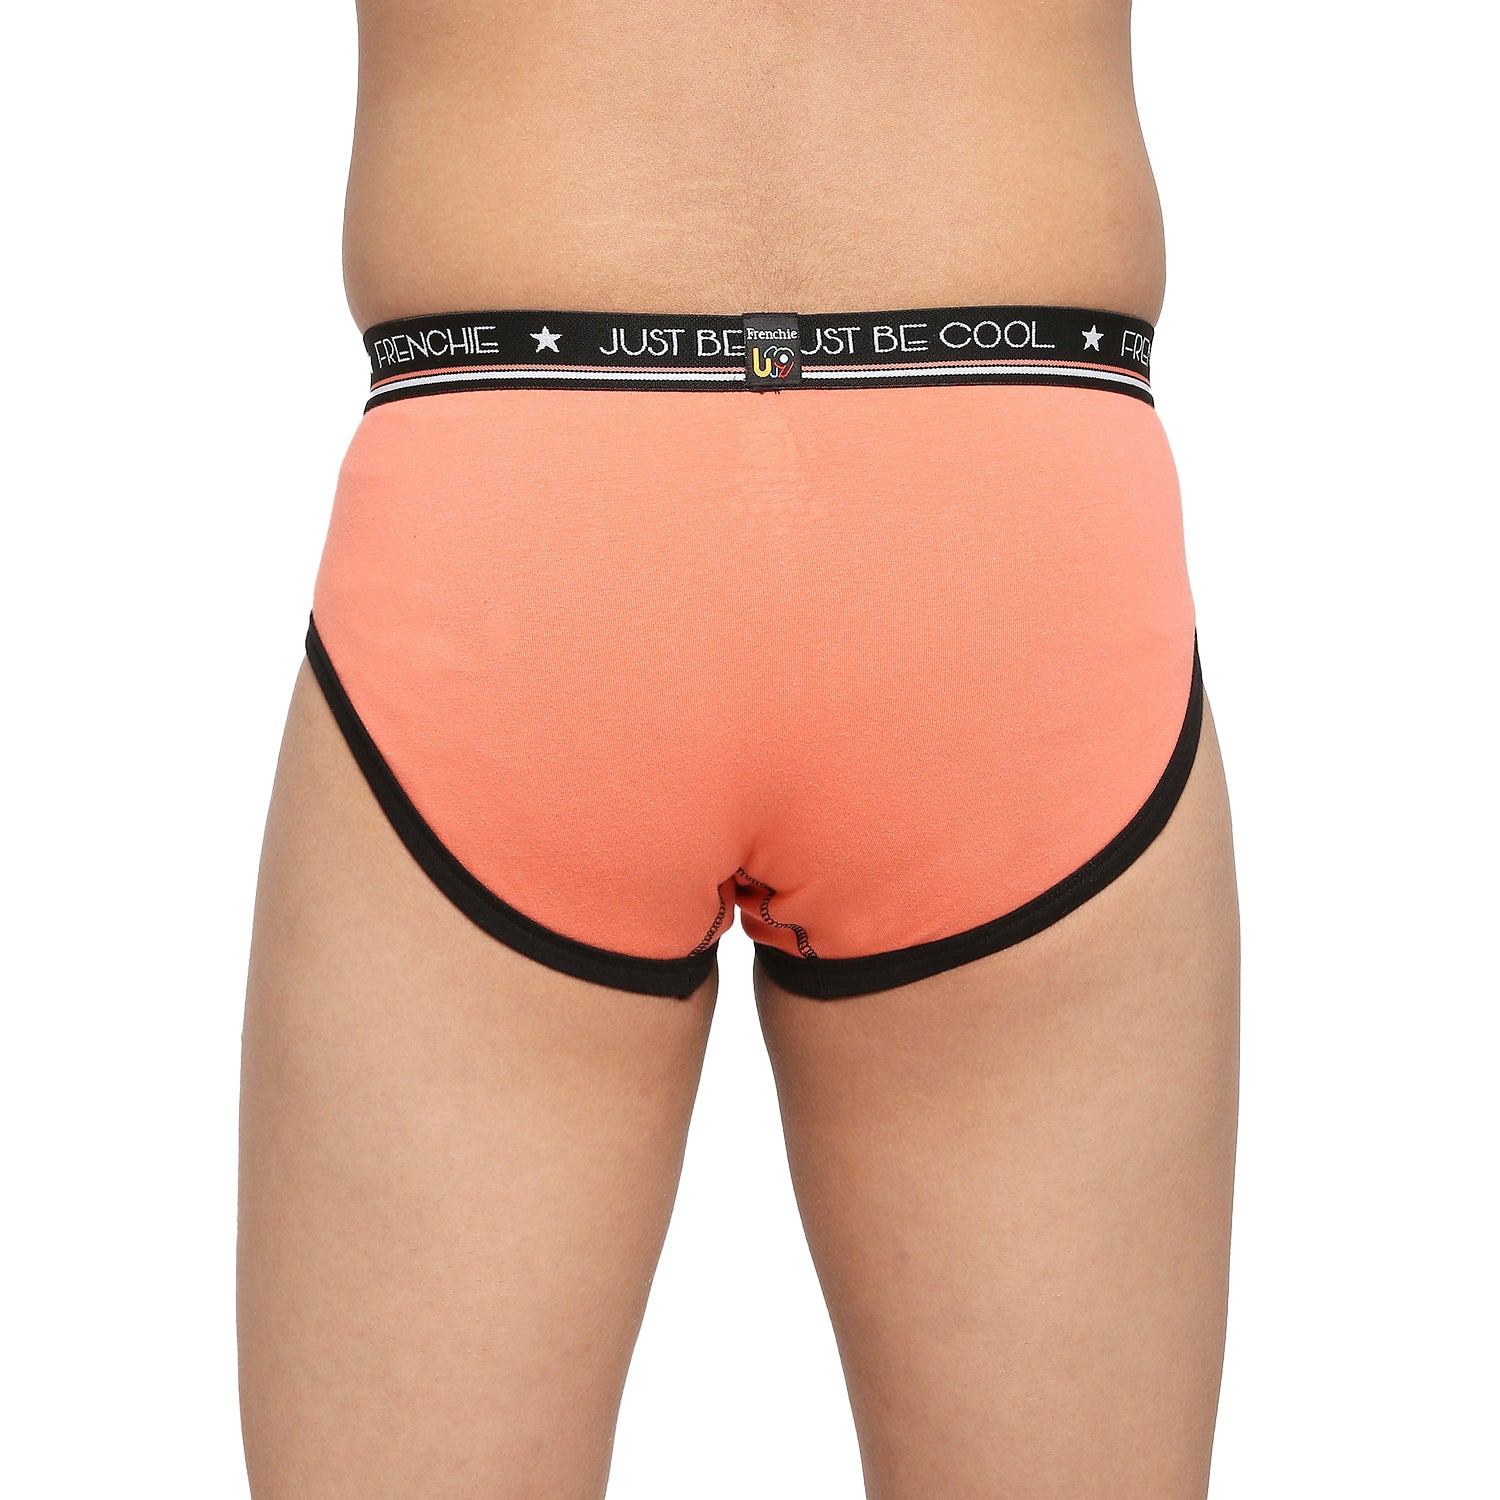 FRENCHIE Teenagers Cotton Brief Light Gray and Peach - Pack of 2